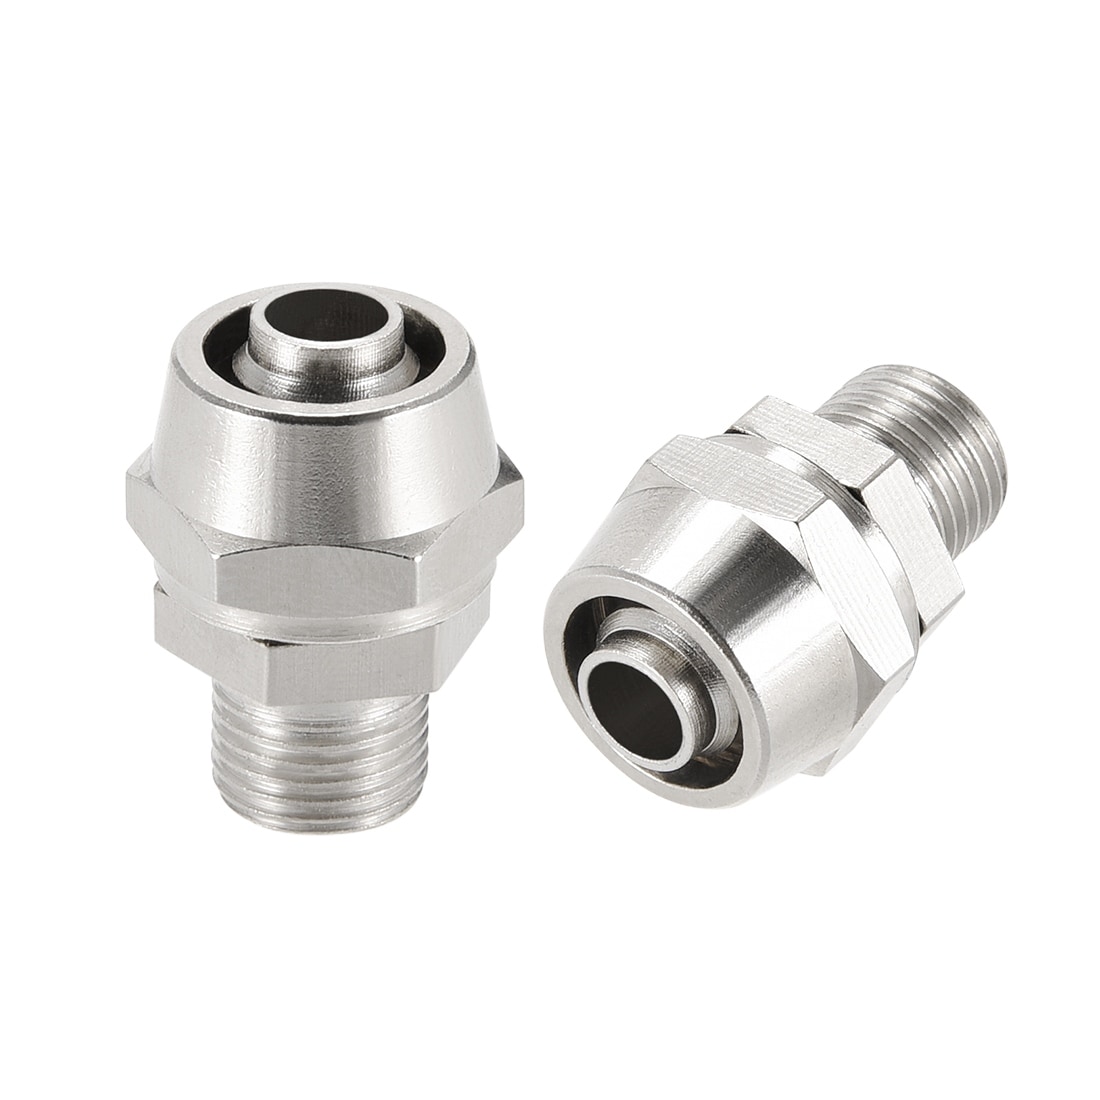 Hose 8-12mm Air Hose Quick Release Disconnect Coupling Connector Barb Fittings 